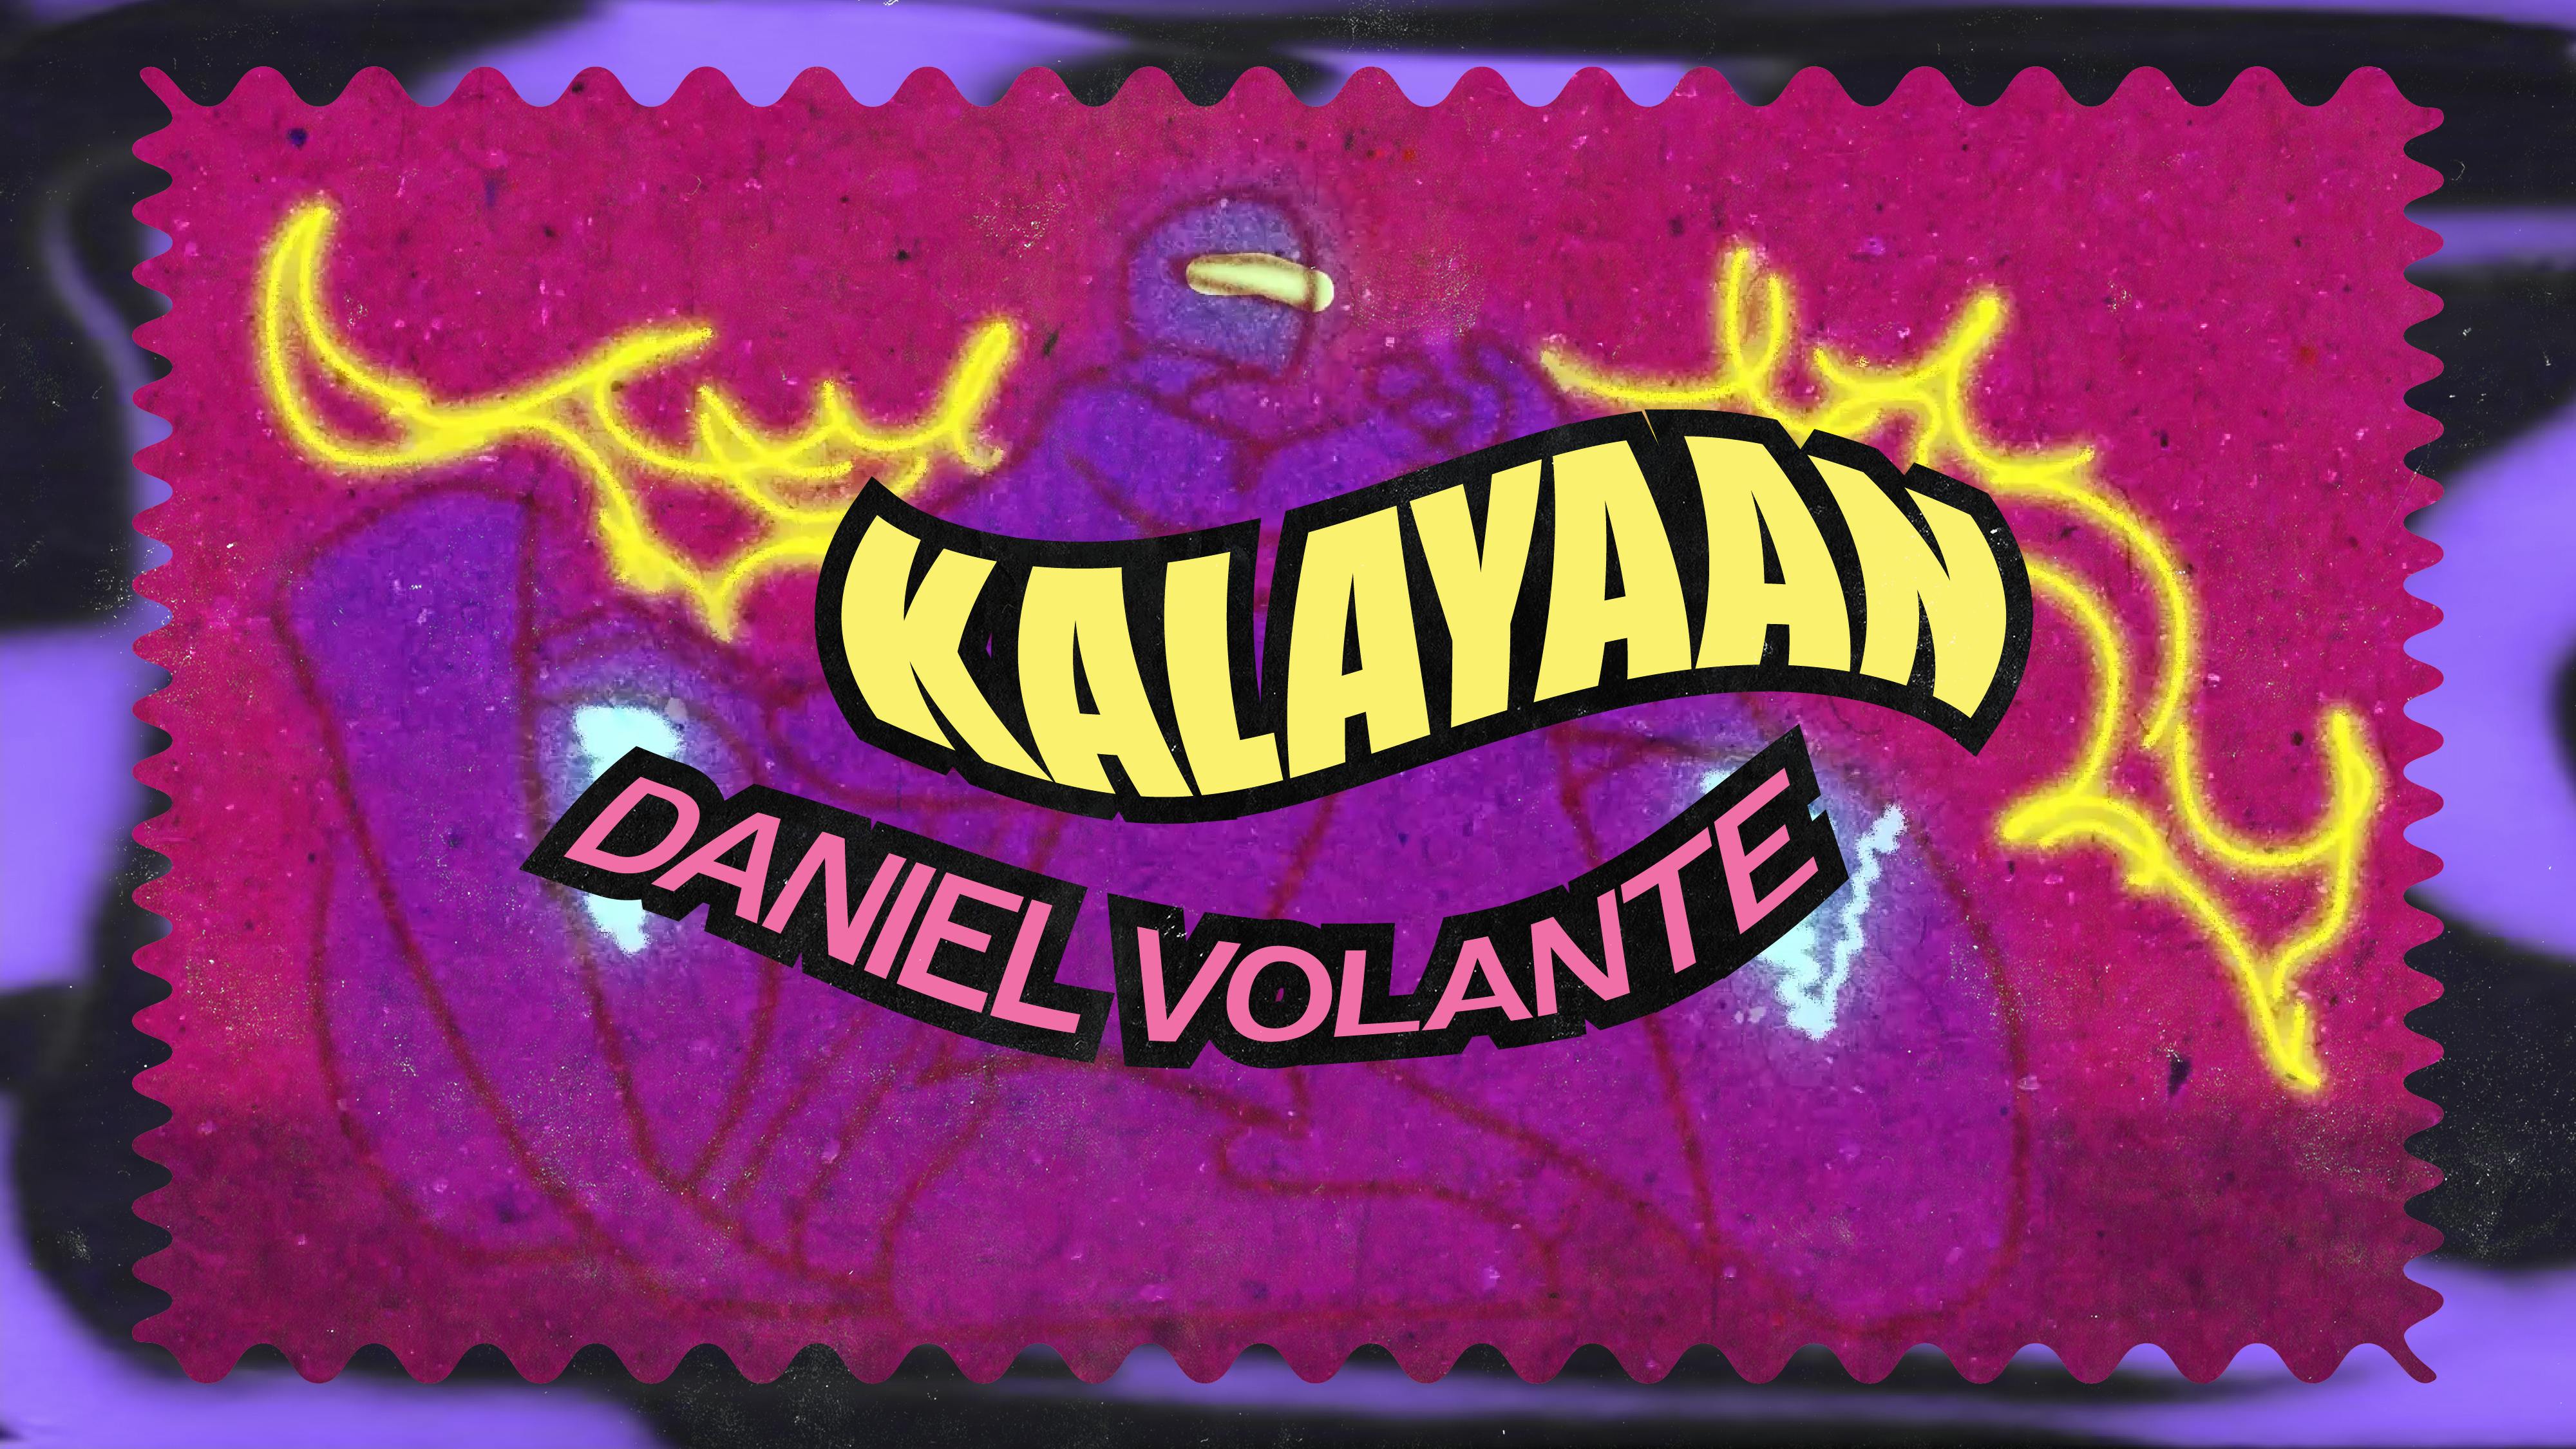 Winner slide for David Ratzlaff's Best Experimental Film for QAS's 2023 Lockdown. Border, and the text above the screenshot reads, "Kalayaan Daniel Volante" 

The screenshot is vivid magenta with yellow lightning effects across the background, with a main character in darker purple riding a motorcycle and wearing a helmet